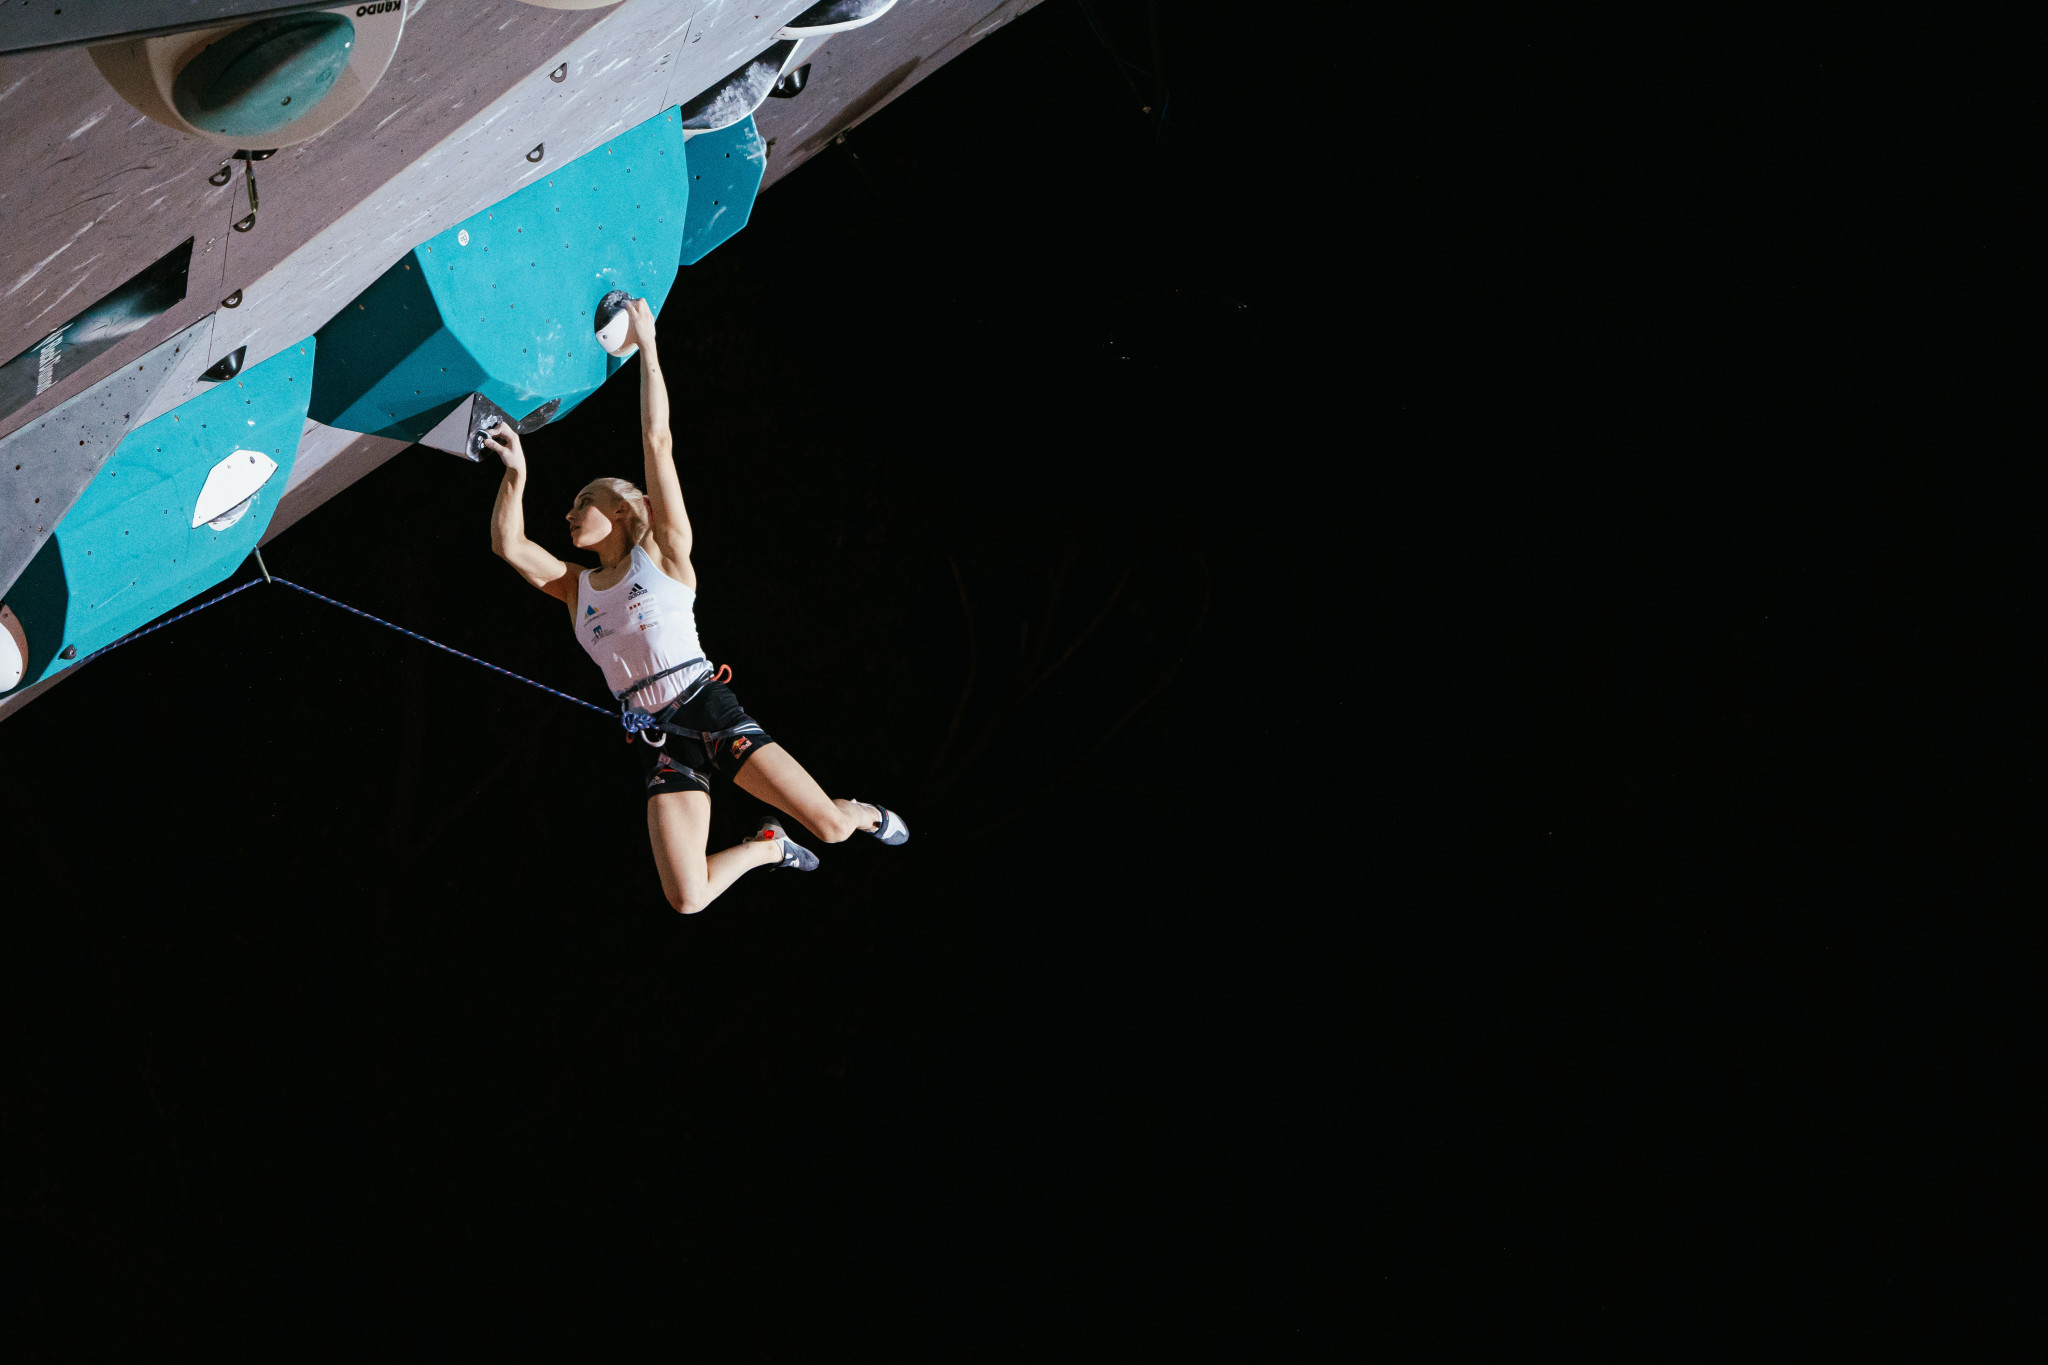 Grupper and Garnbret claim lead golds at Sport Climbing World Cup in Briançon